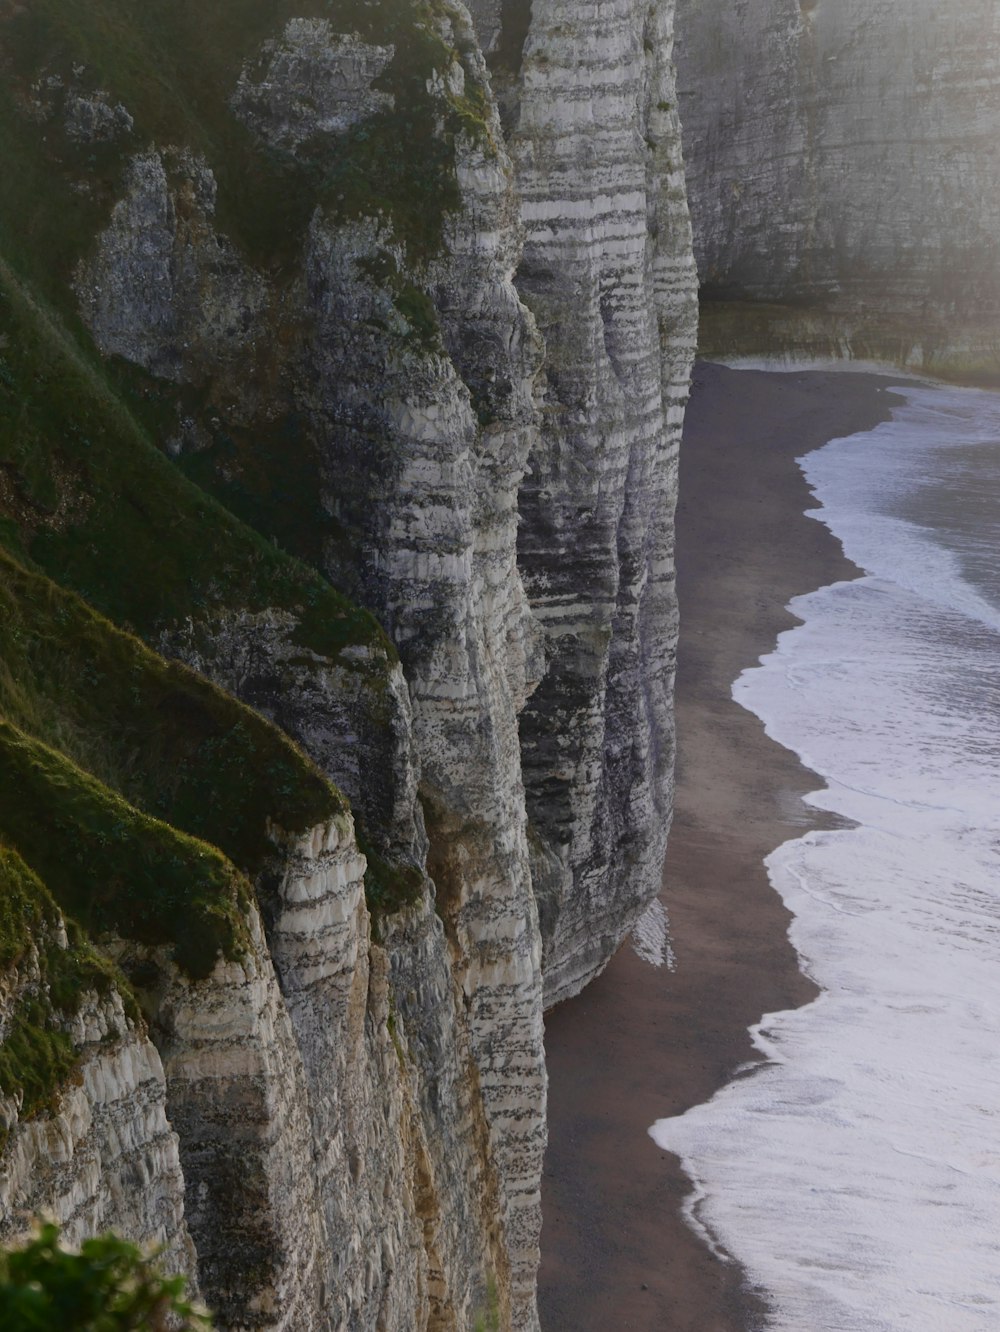 a view of a beach and cliffs from a high cliff